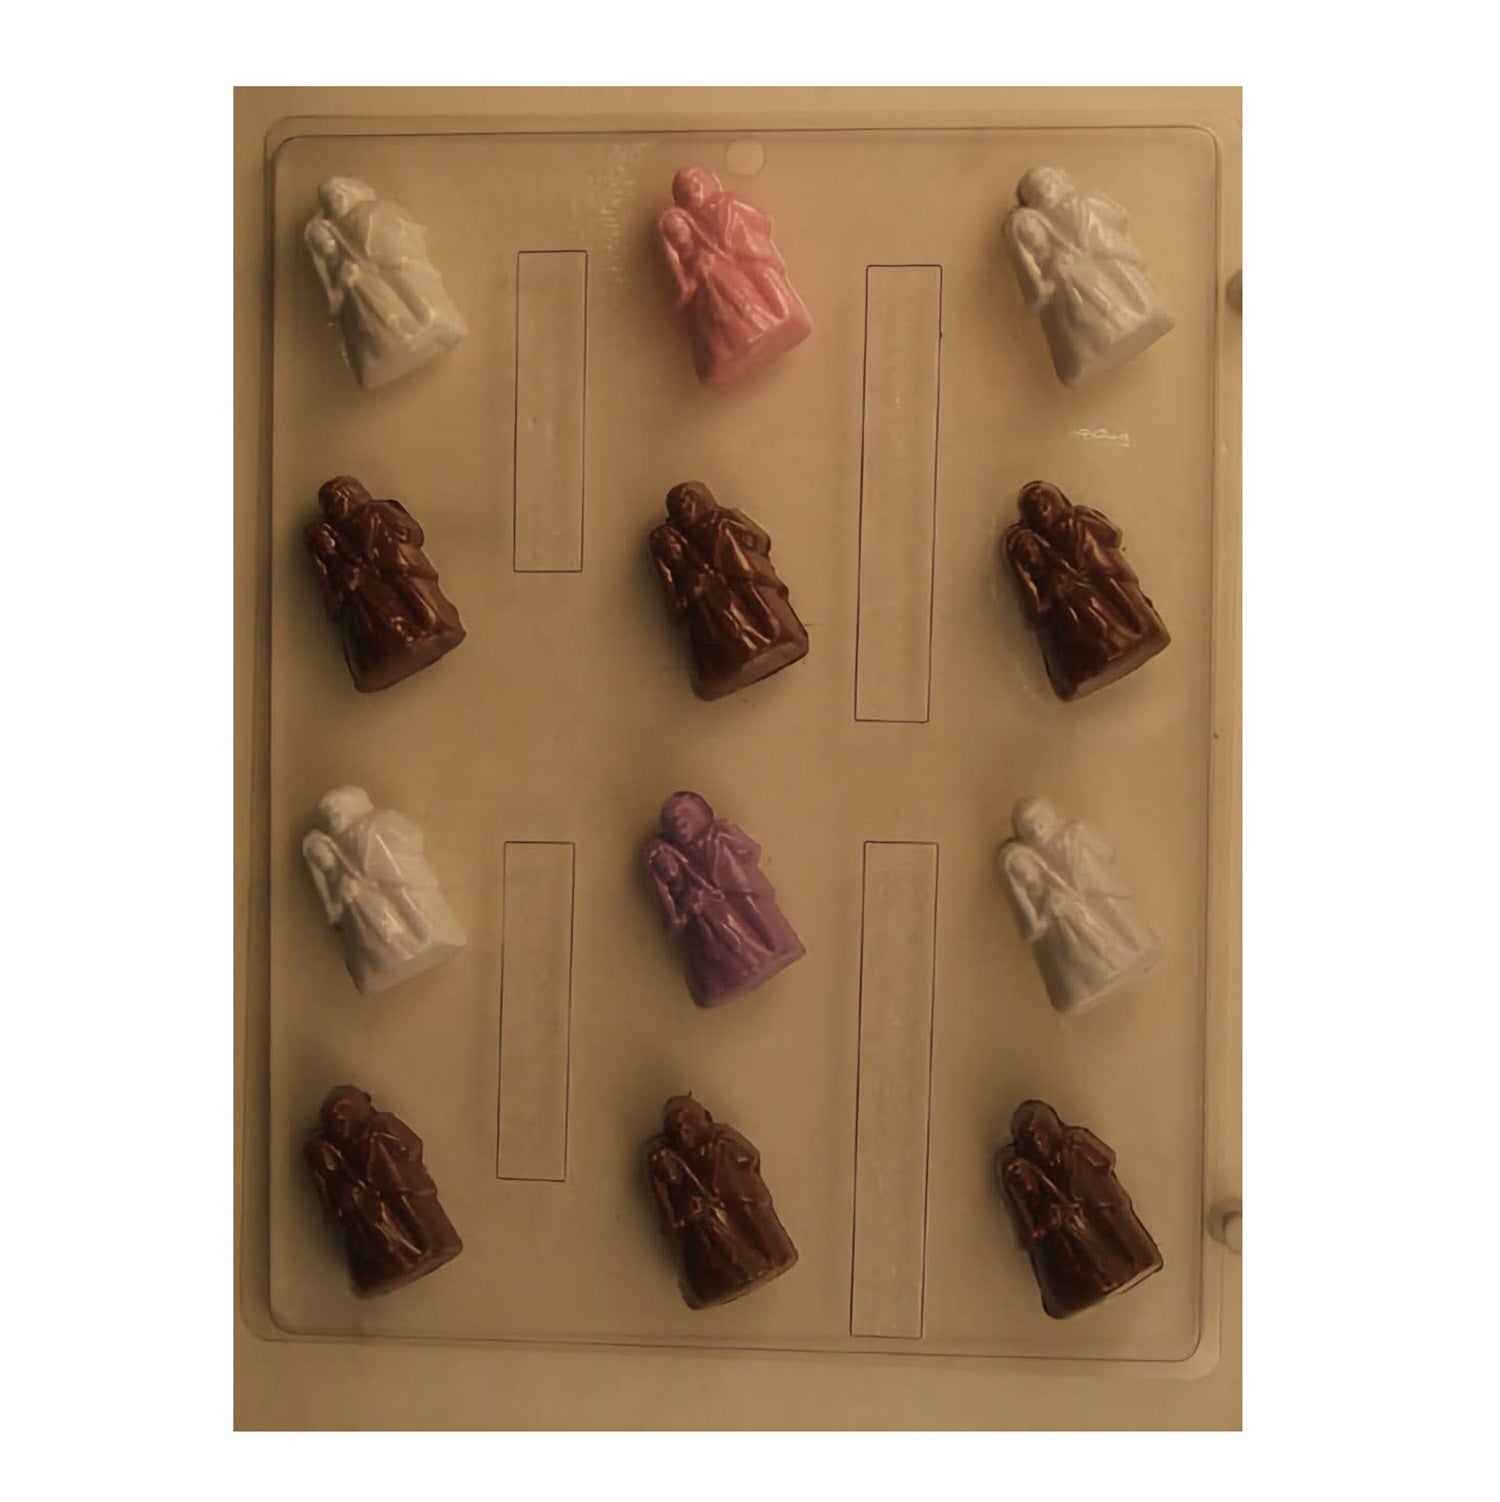 Chocolate mold featuring small bride and groom figures, ideal for wedding chocolates or edible favors.